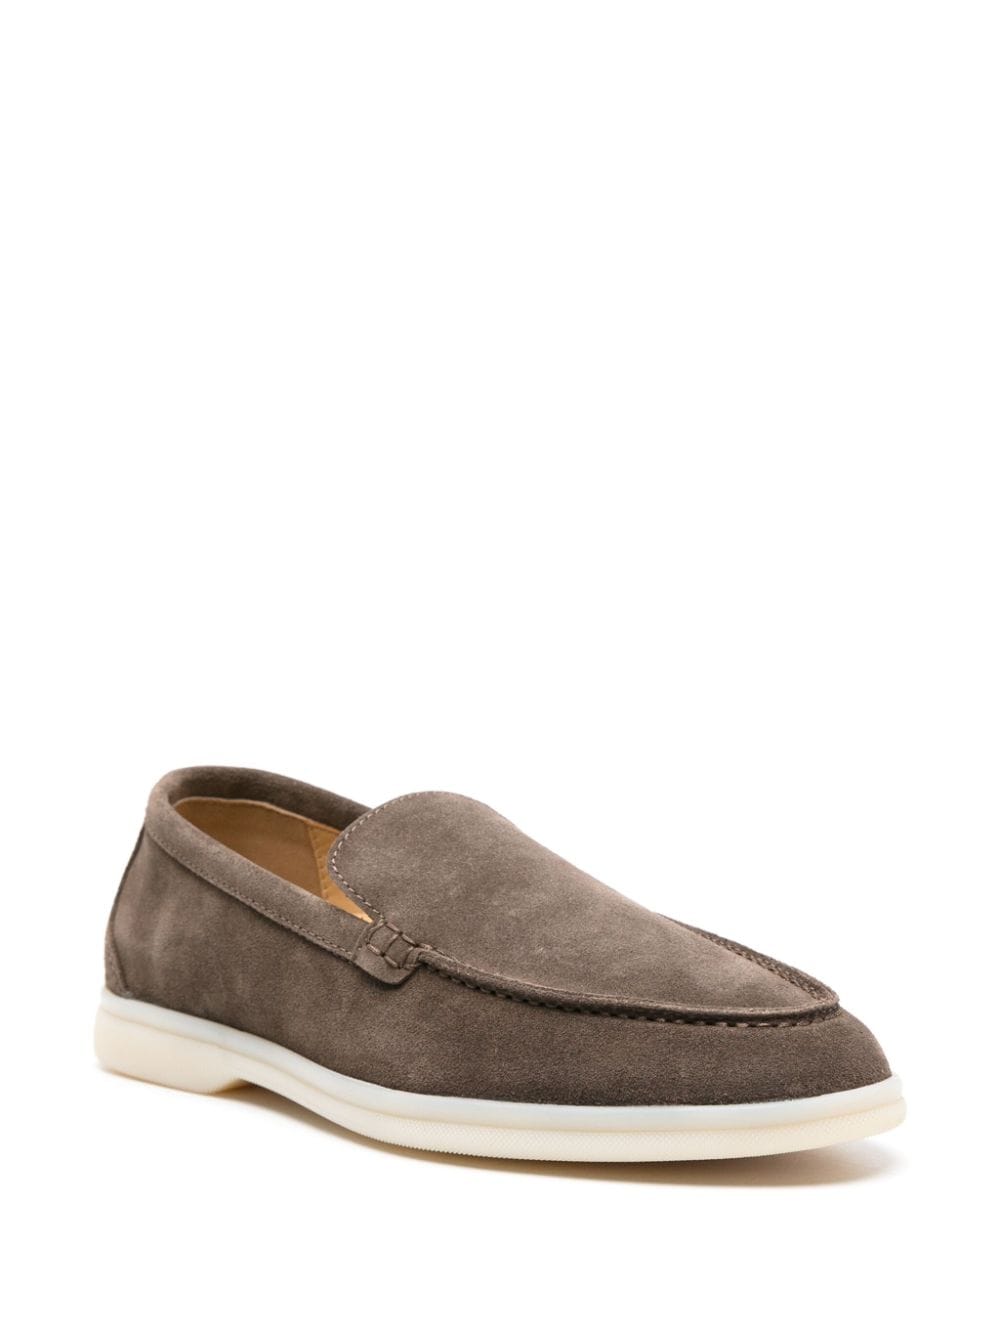 Scarosso Ludovica suede loafers - Beige